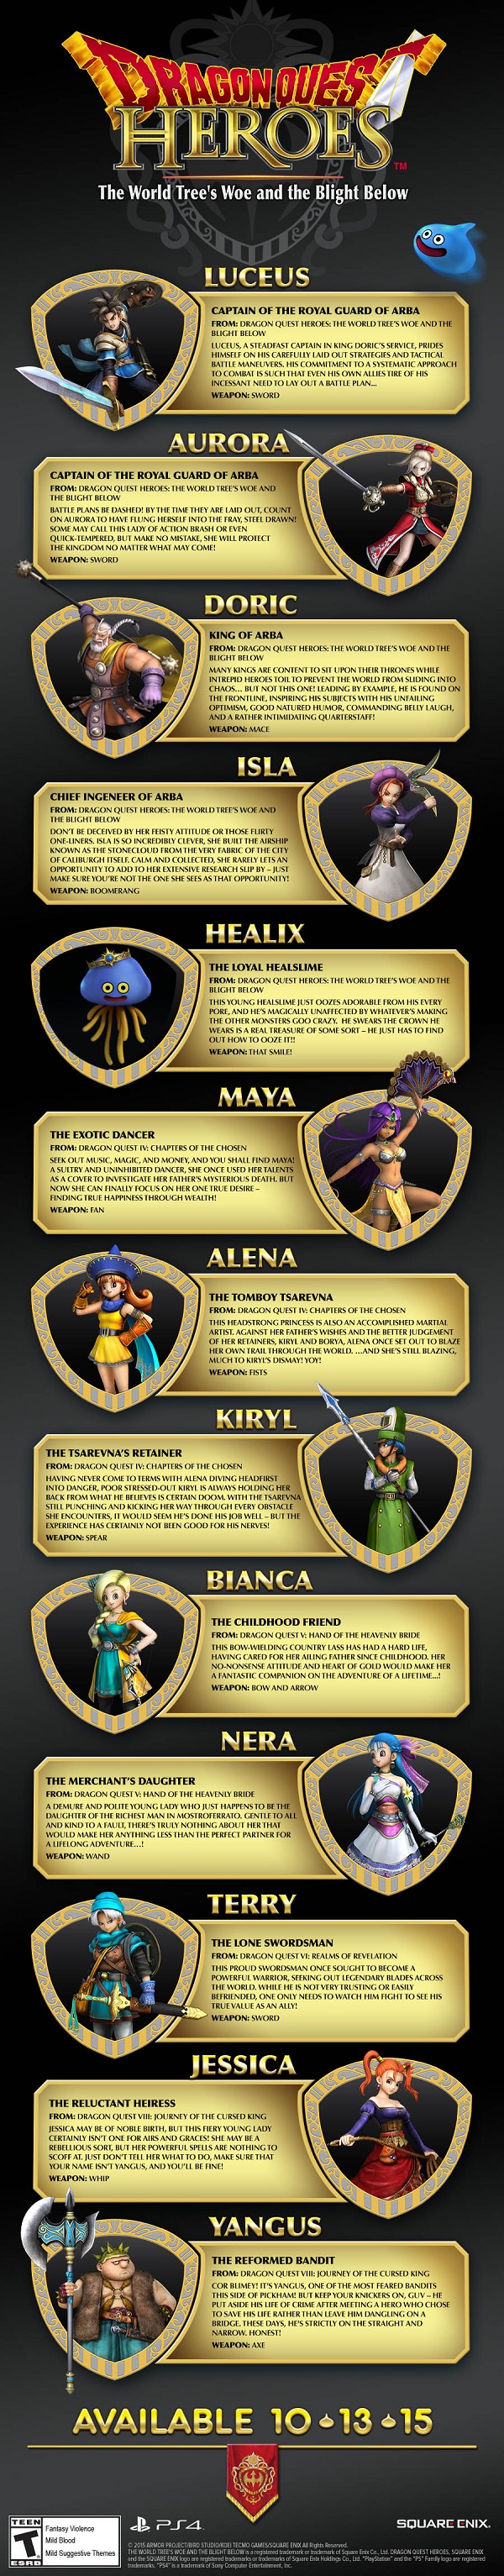 dragon-quest-heroes-infographic